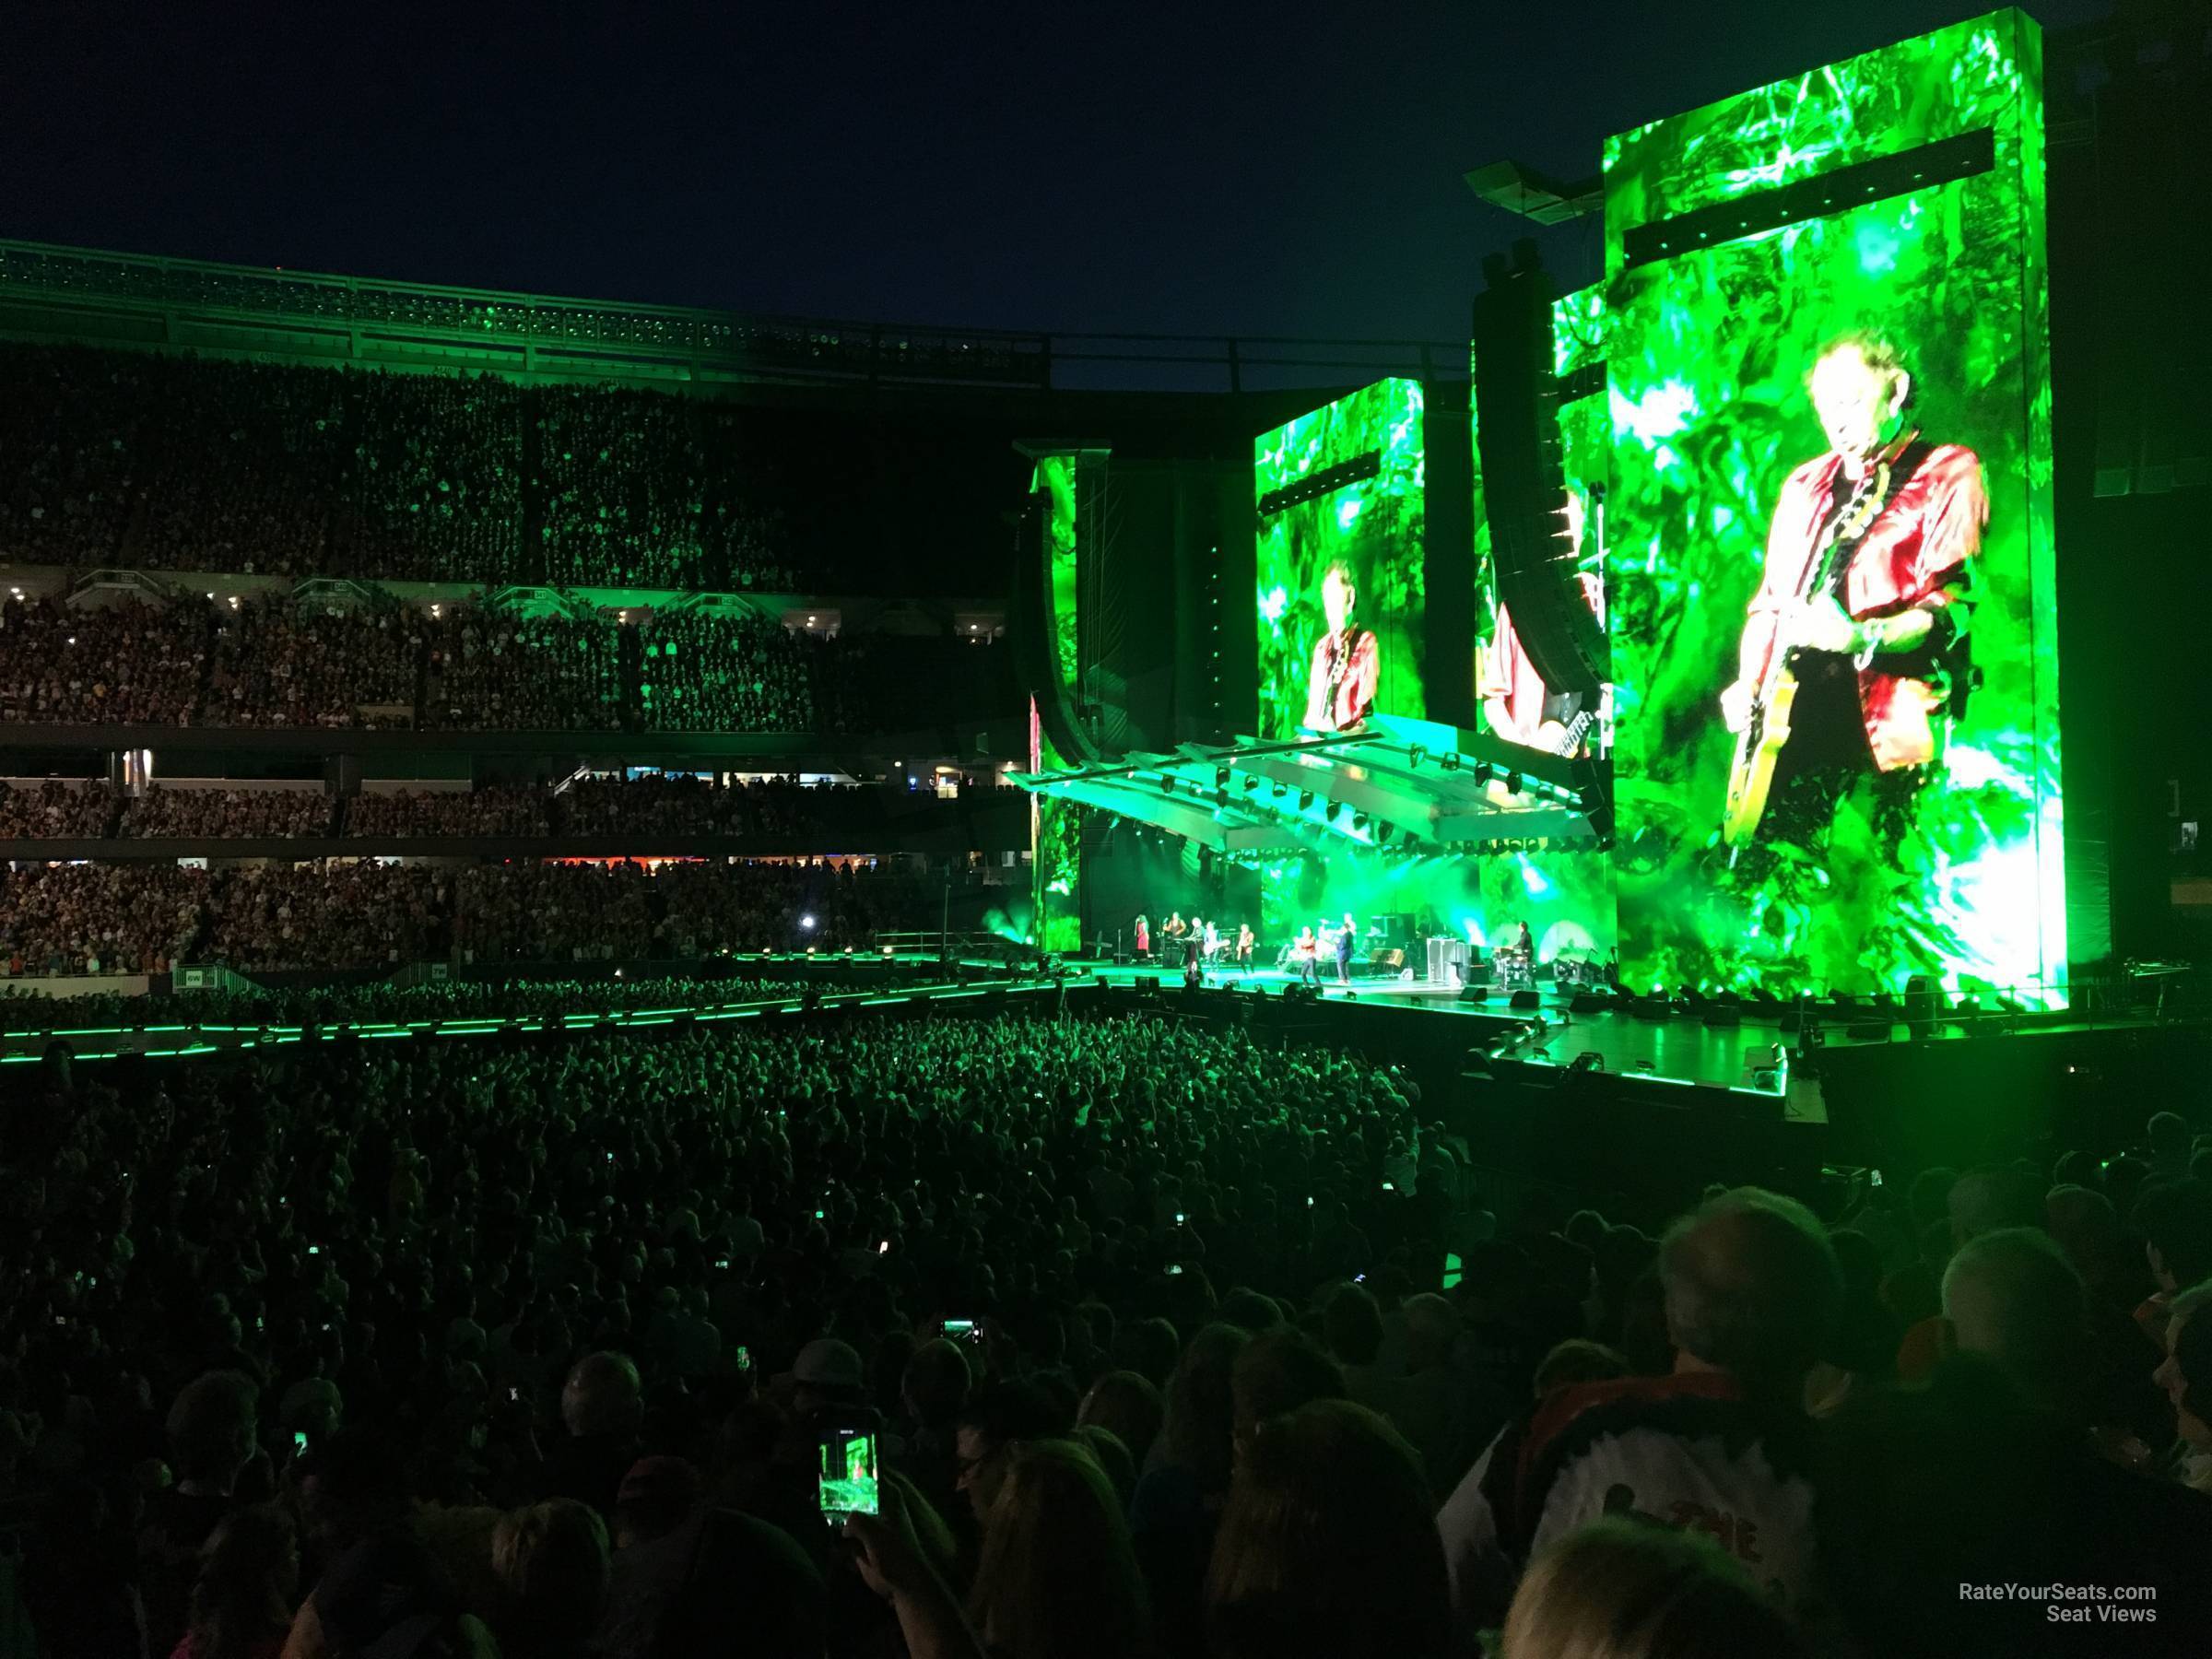 section 106, row 8 seat view  for concert - soldier field